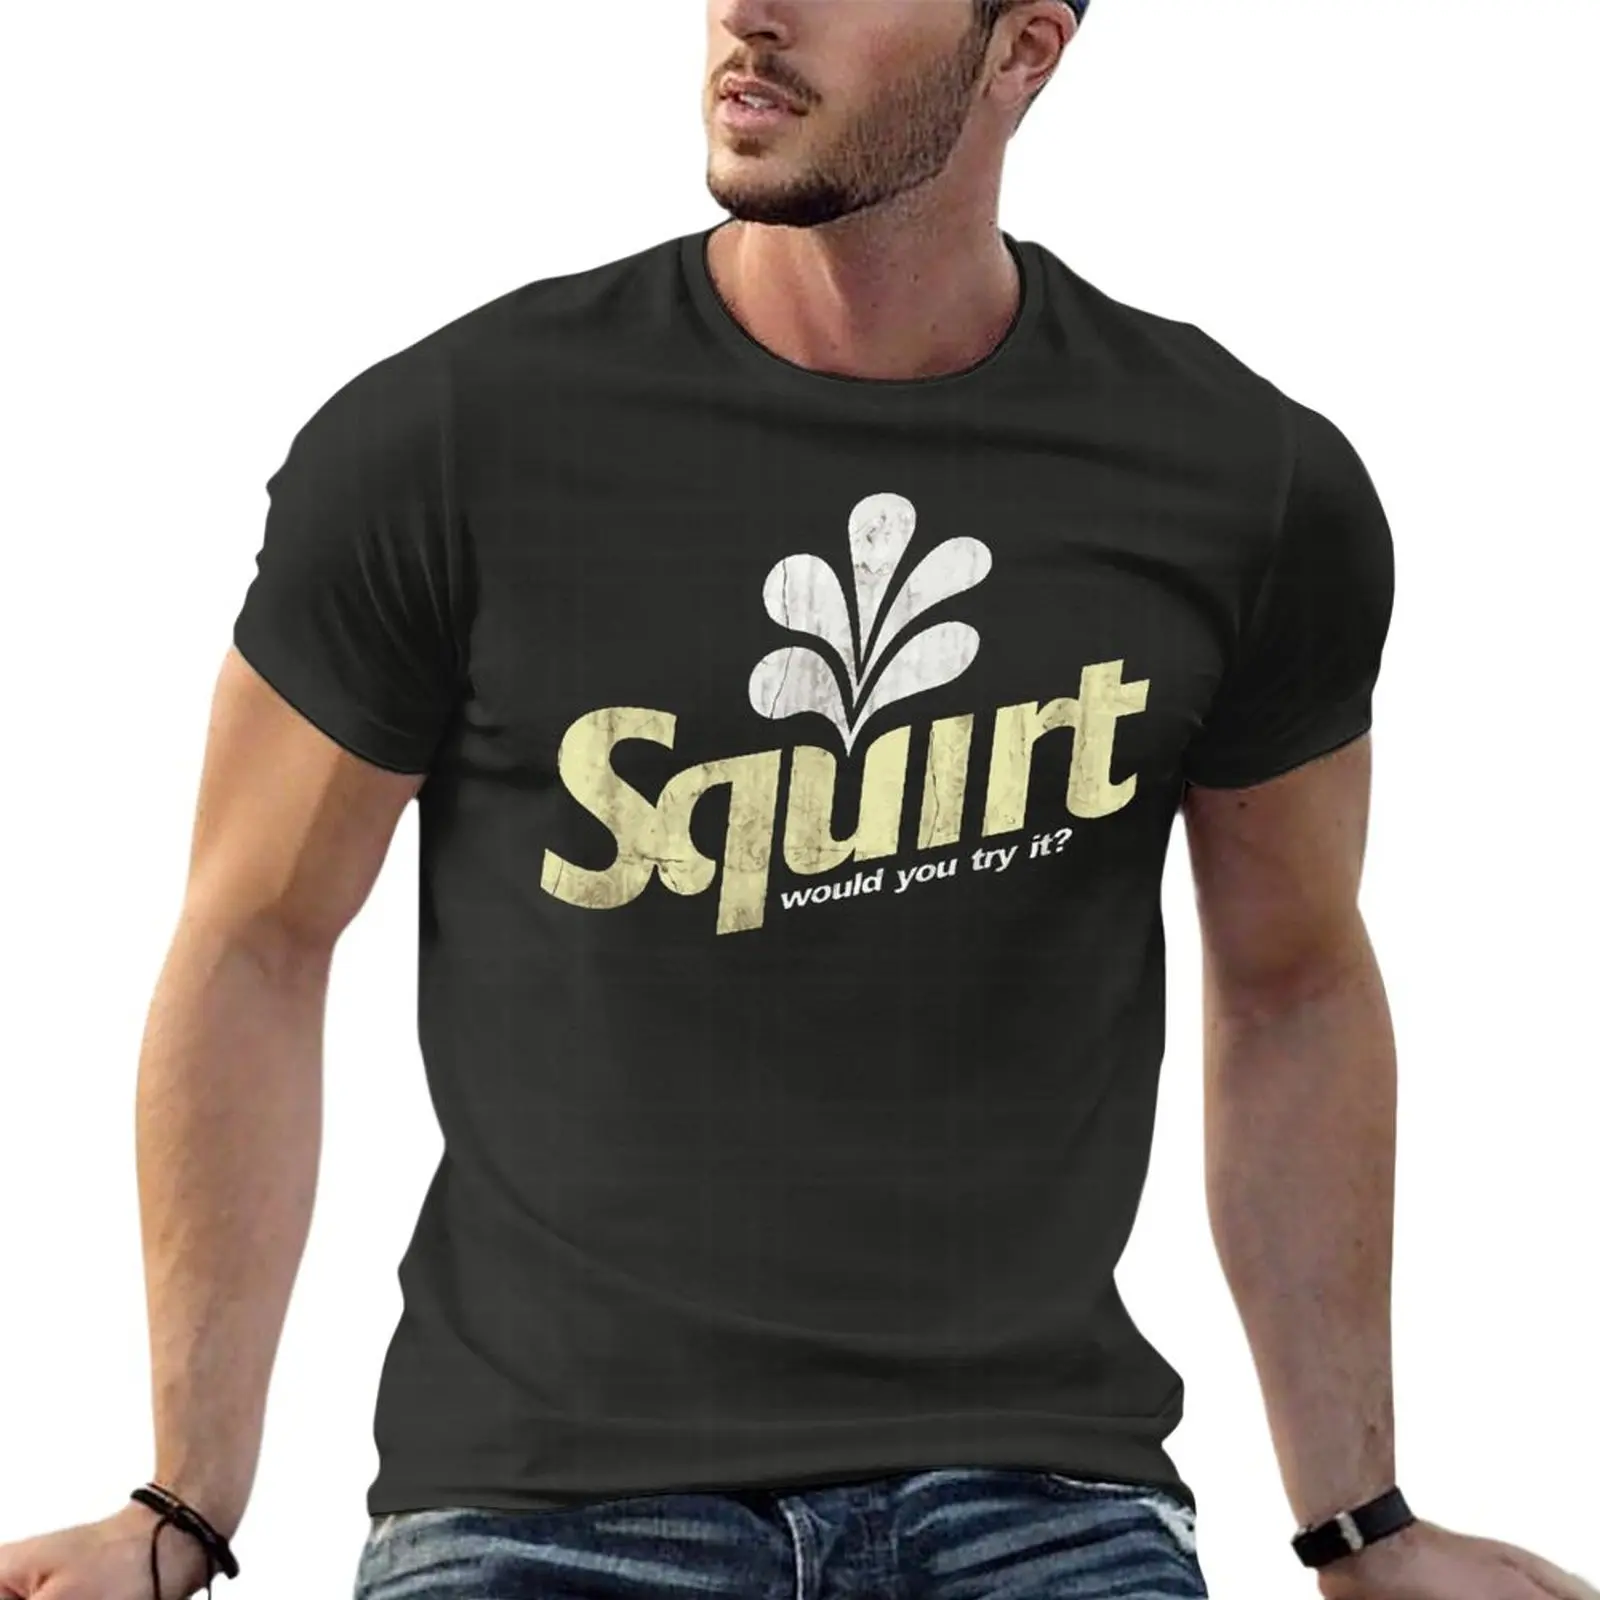 

Uomo Squirt Would You Try It Porno Funny Oversized T Shirt Summer Mens Clothing Short Sleeve Streetwear Plus Size Top Tee